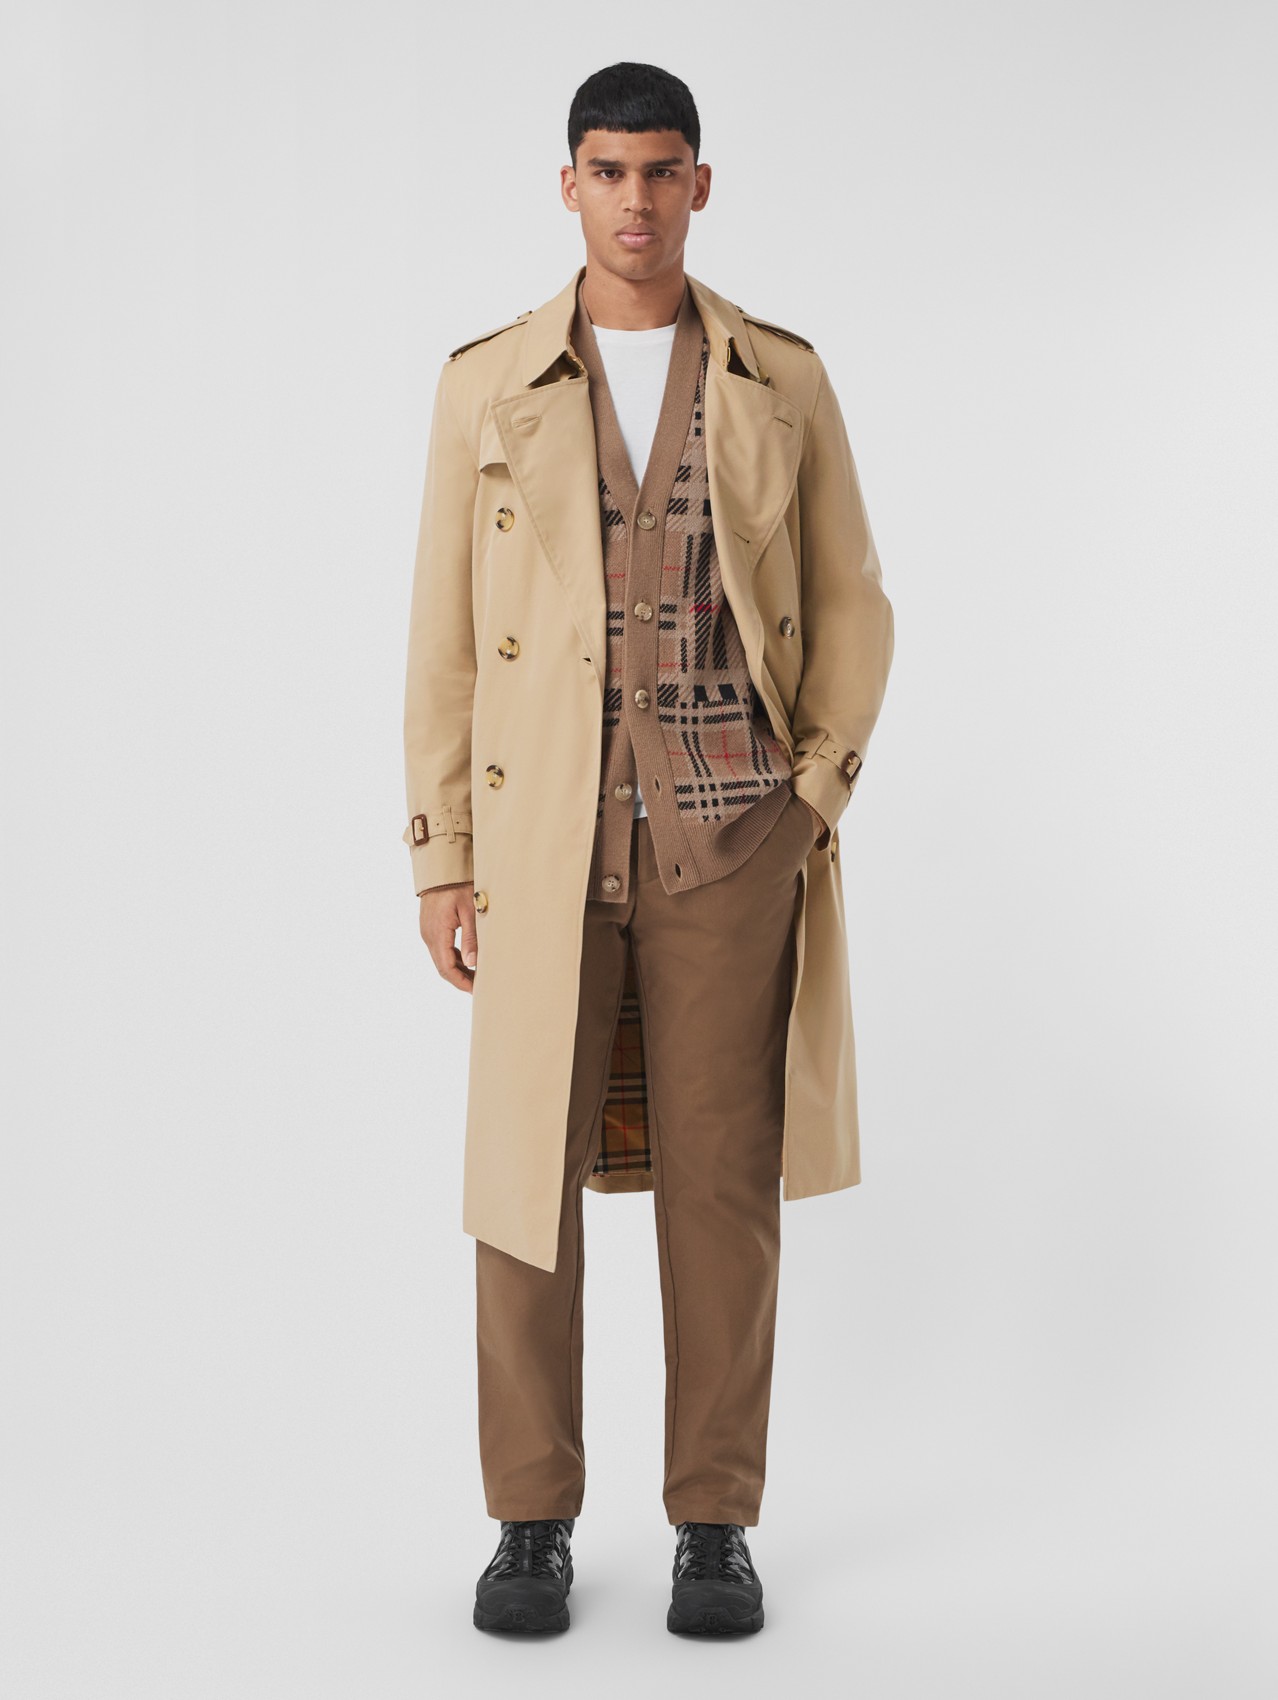 pendul Reparation mulig fad Men's Trench Coats | Heritage Trench Coats | Burberry® Official